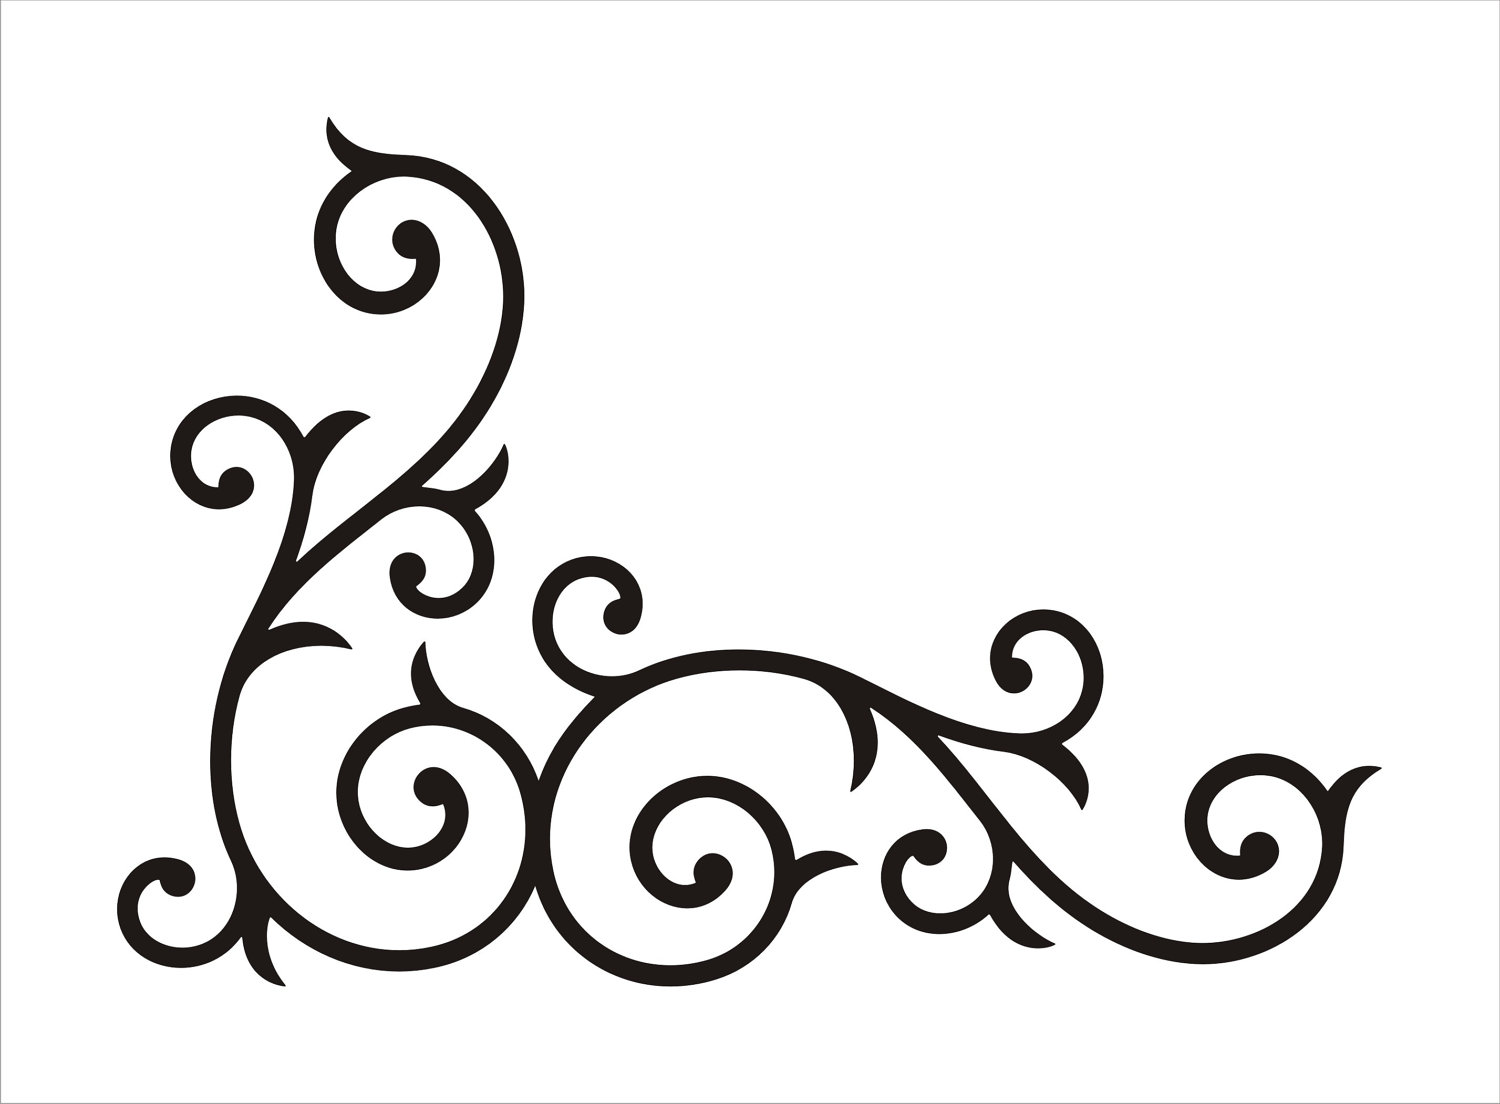 Scrollwork scroll art clipart image